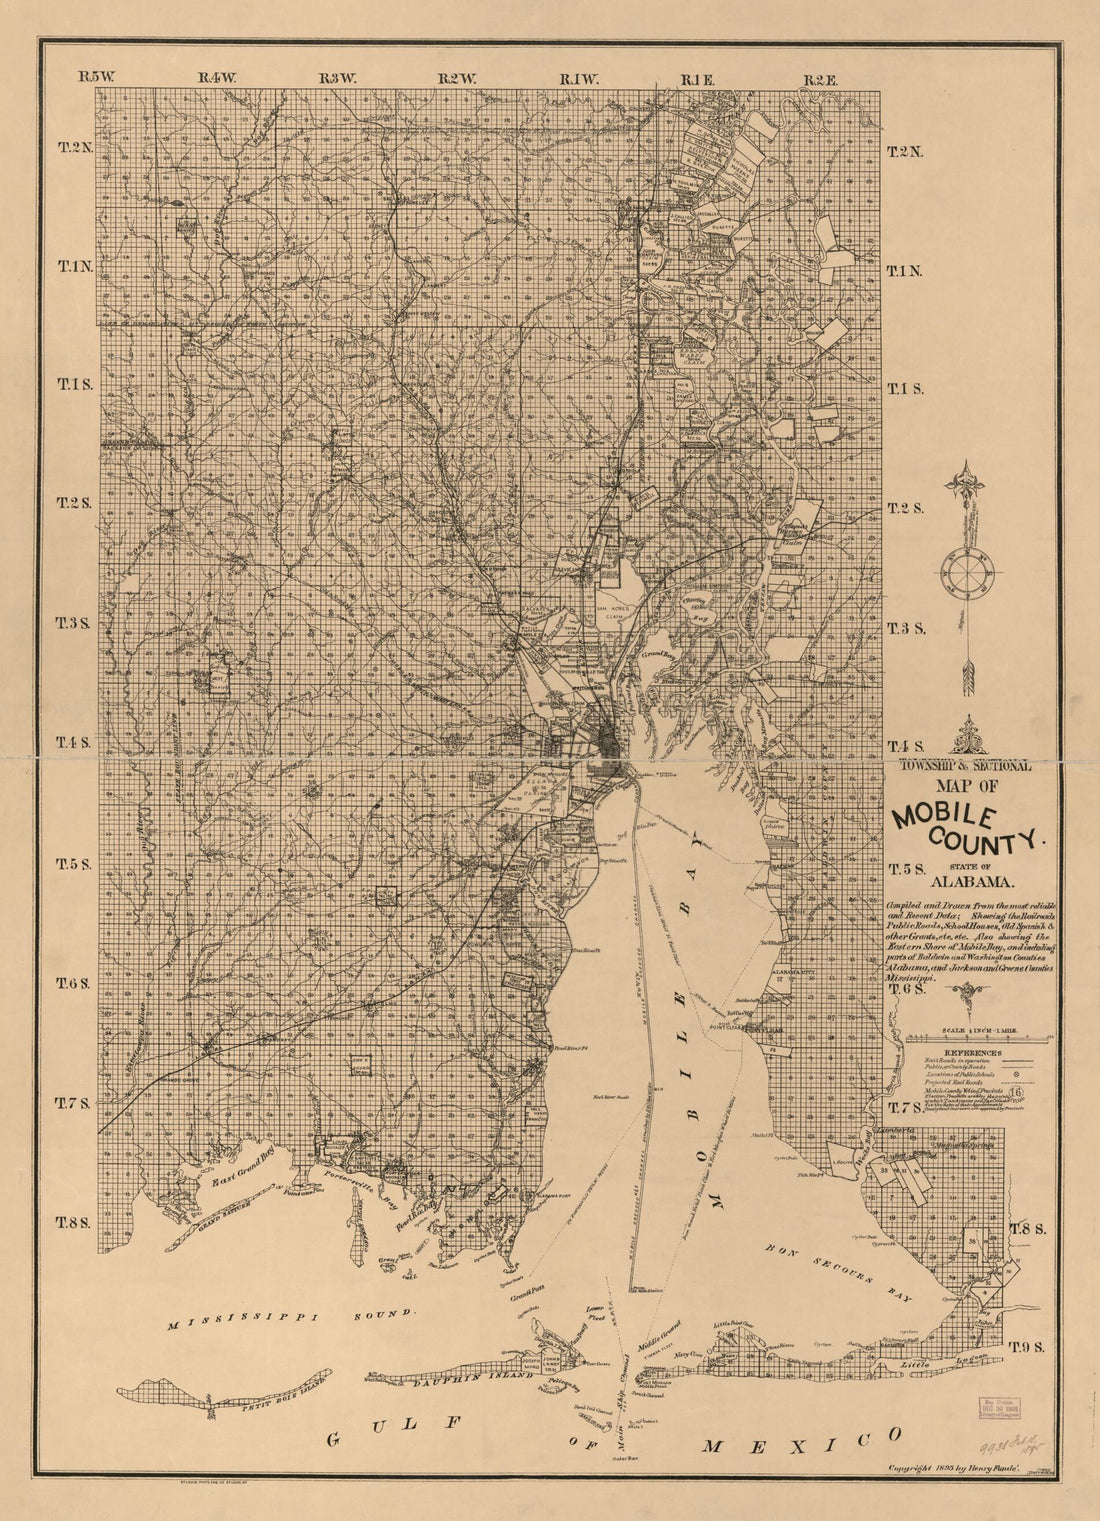 This old map of Township and Sectional Map of Mobile County, State of Alabama : Compiled and Drawn from the Most Reliable and Recent Data : Showing the Railroads, Public Roads, School Houses, Old Spanish &amp; Other Grants, Etc., Etc from 1895 was created by